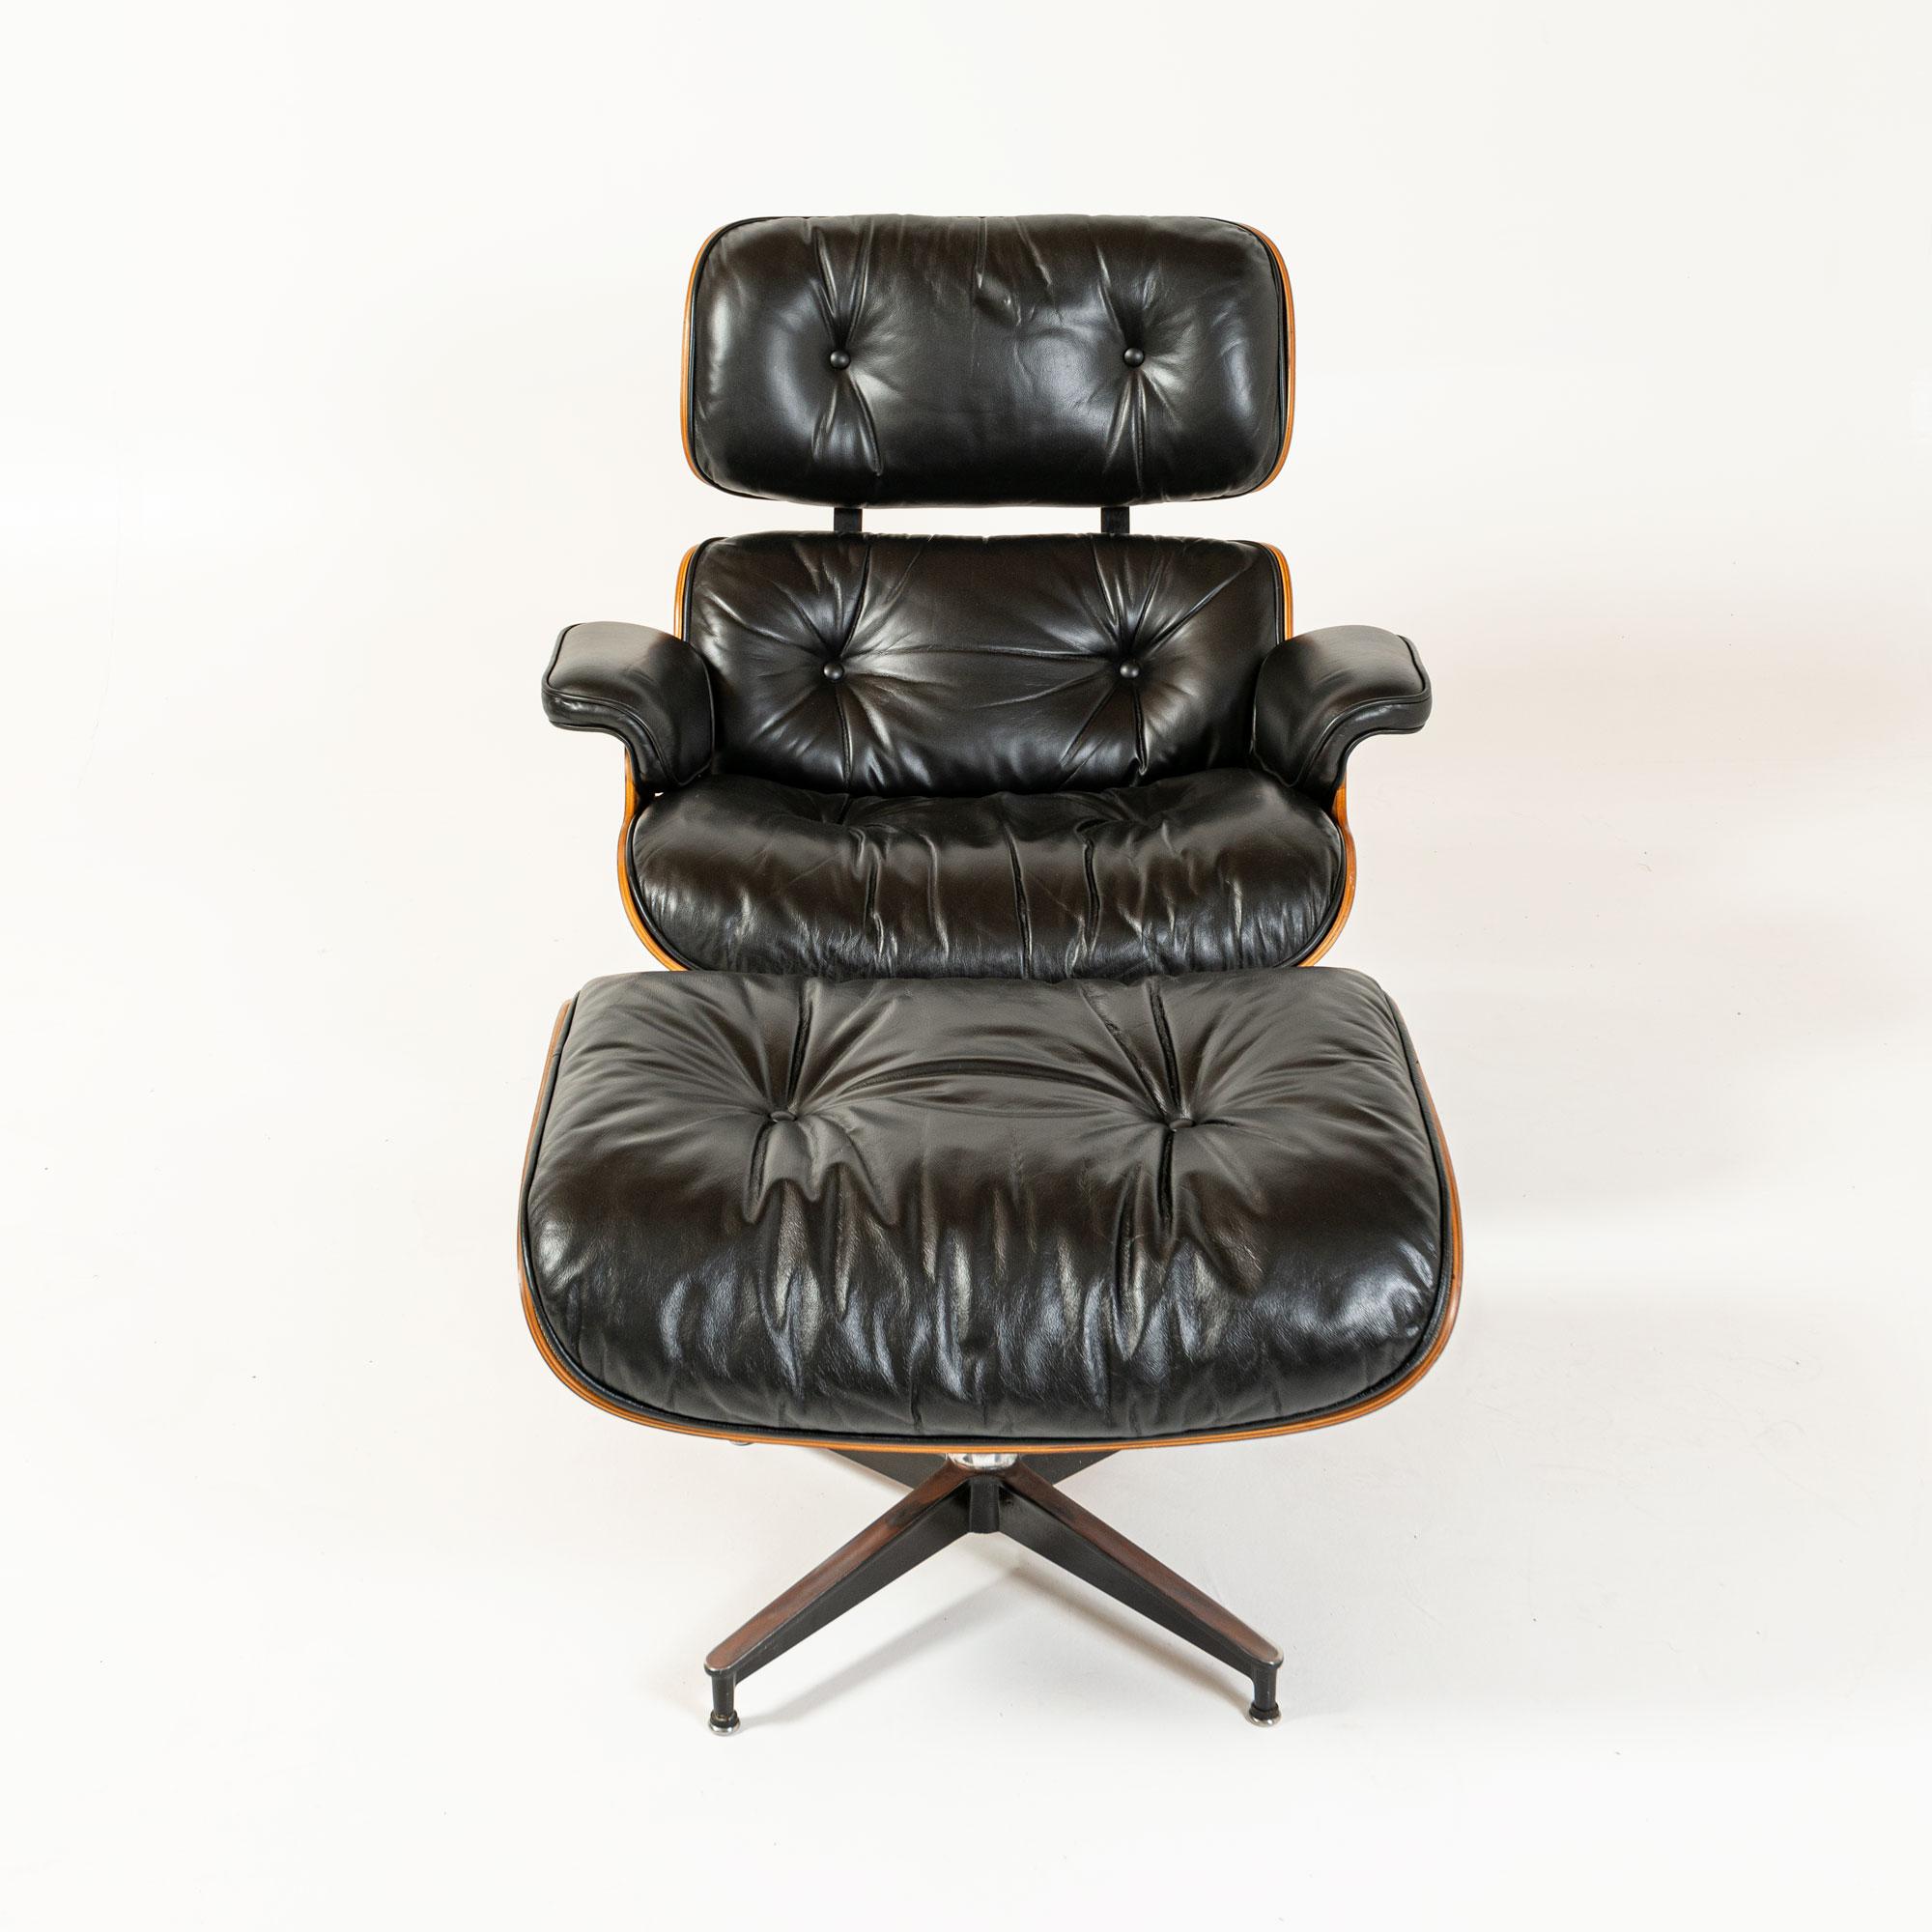 American Exceptional 3rd Gen Eames Lounge Chair and Ottoman in Rosewood and Black Leather